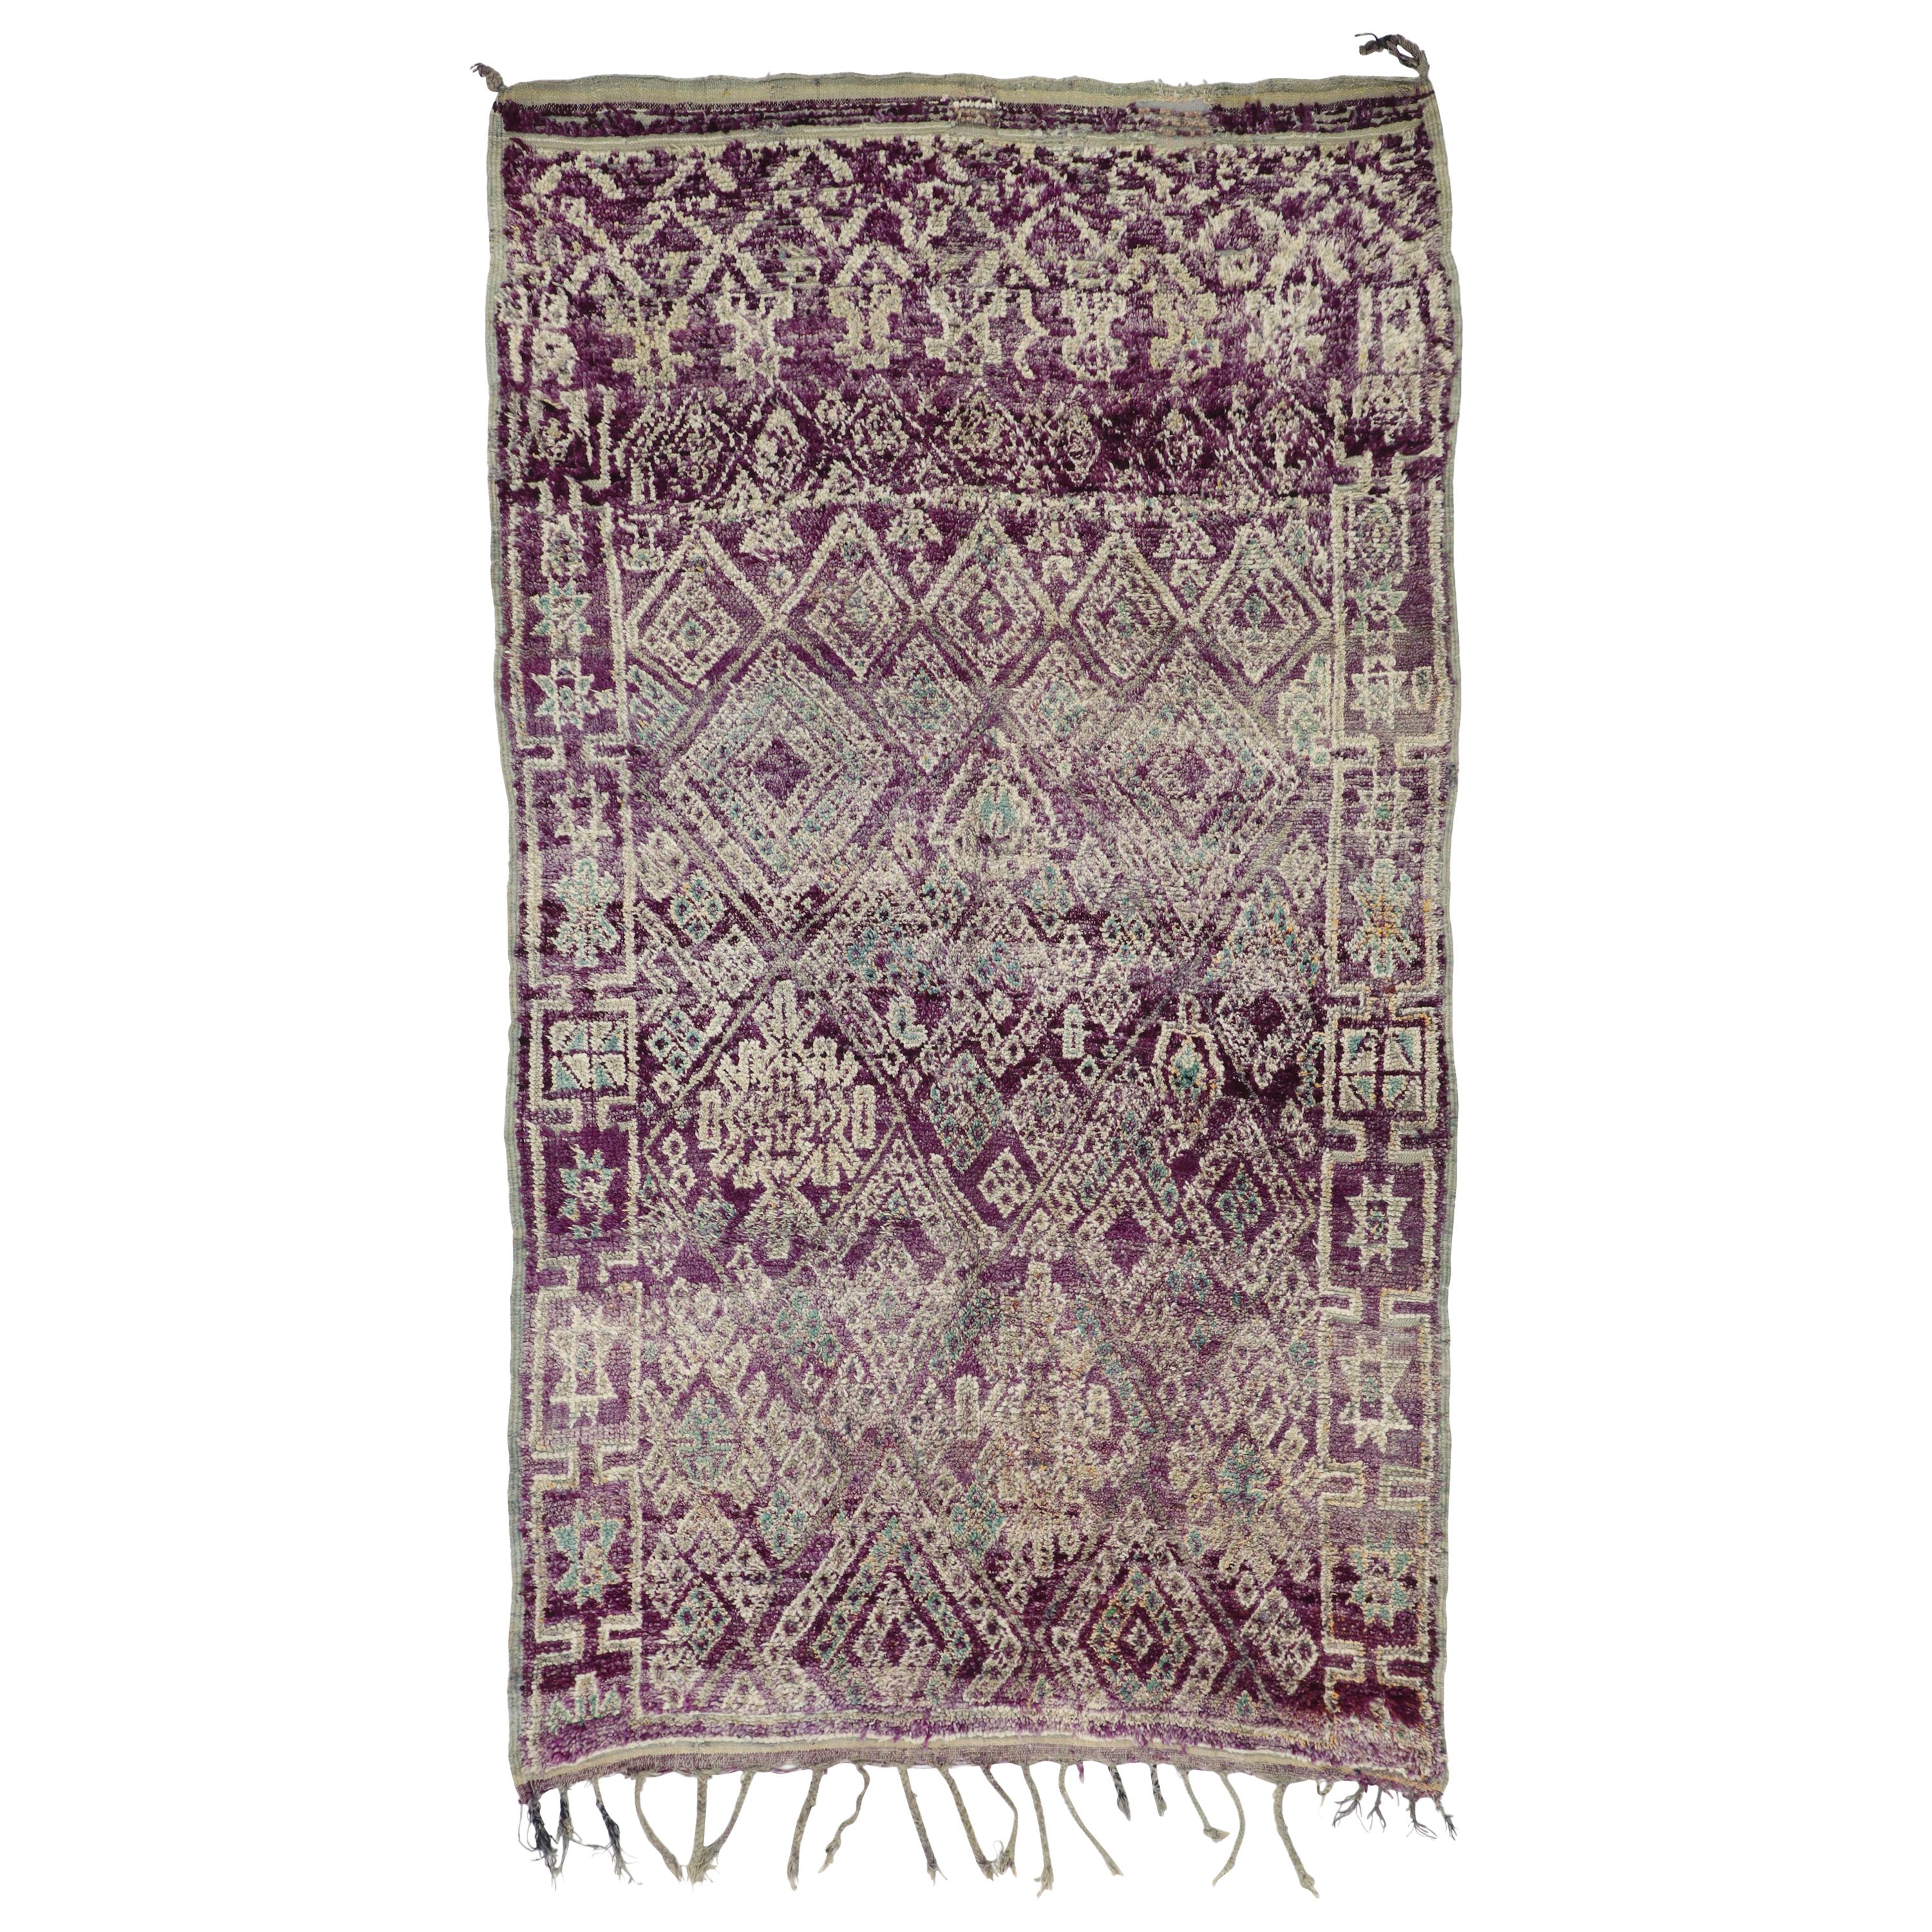 Vintage Berber Purple Moroccan Mrirt Rug with Tribal Style